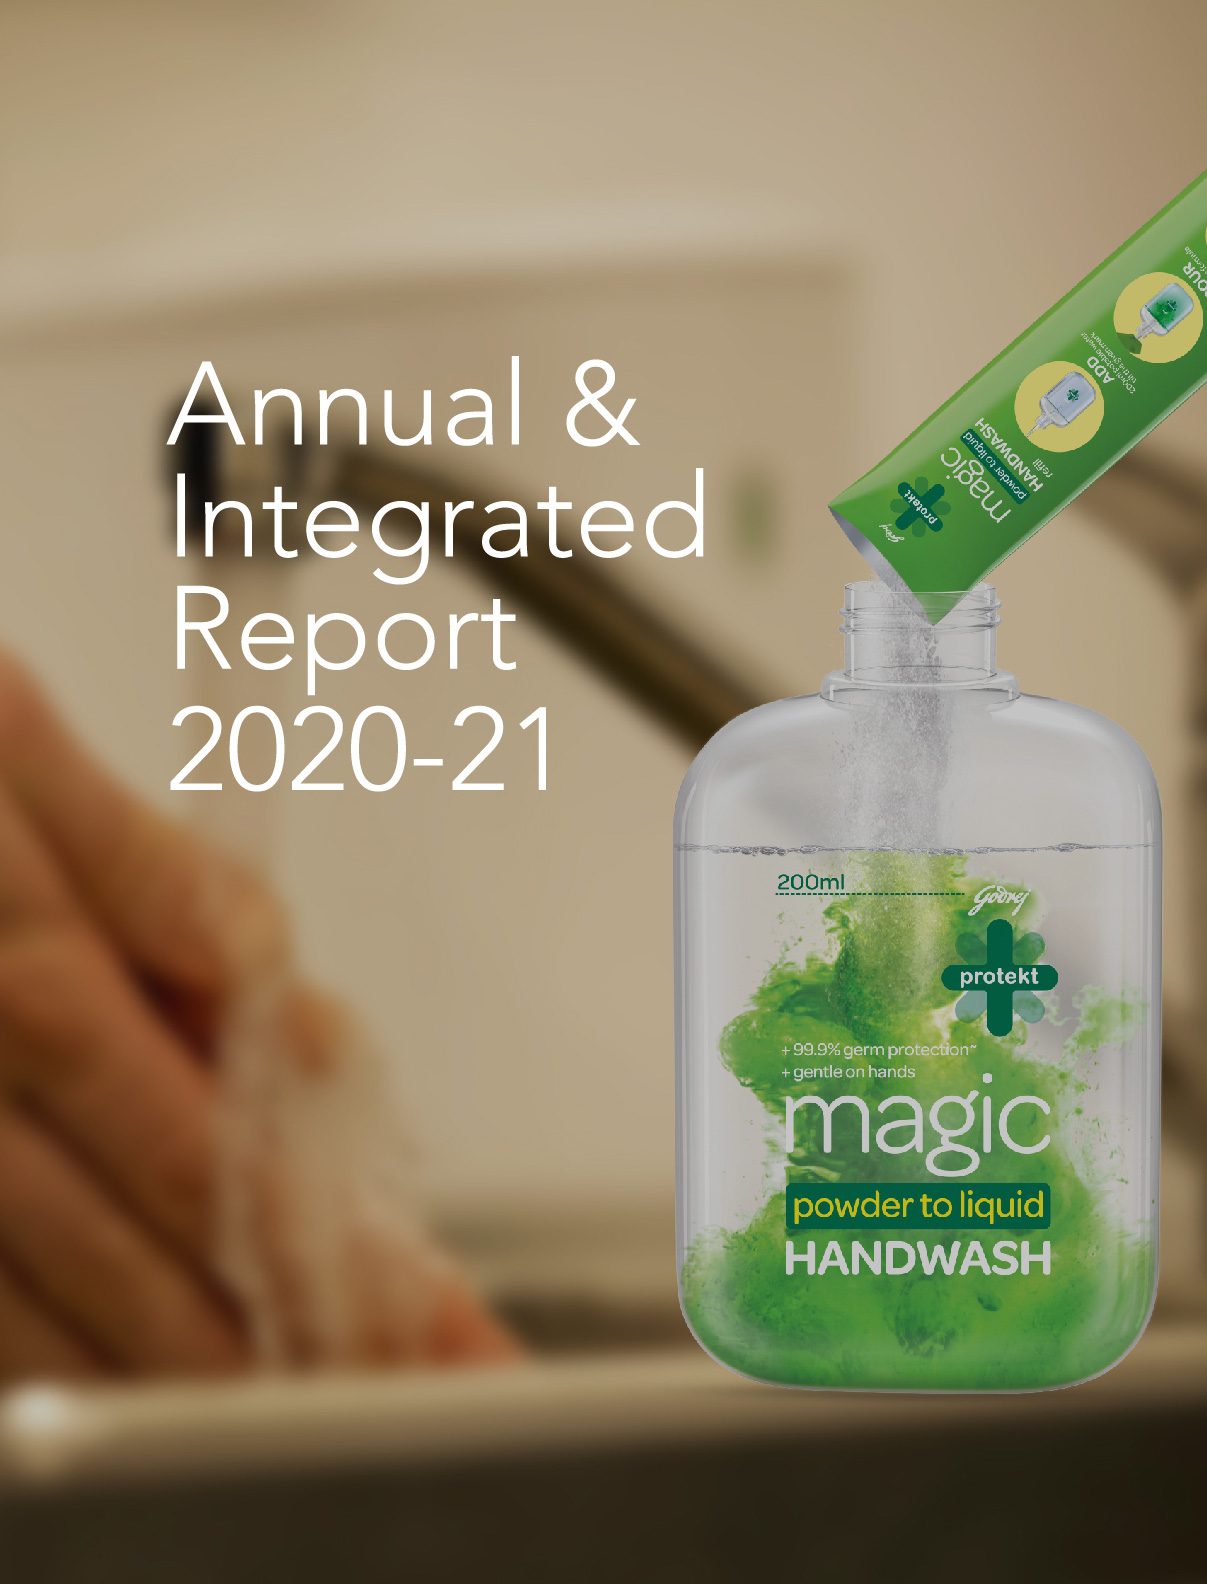 Annual & Integrated Report 2019-20